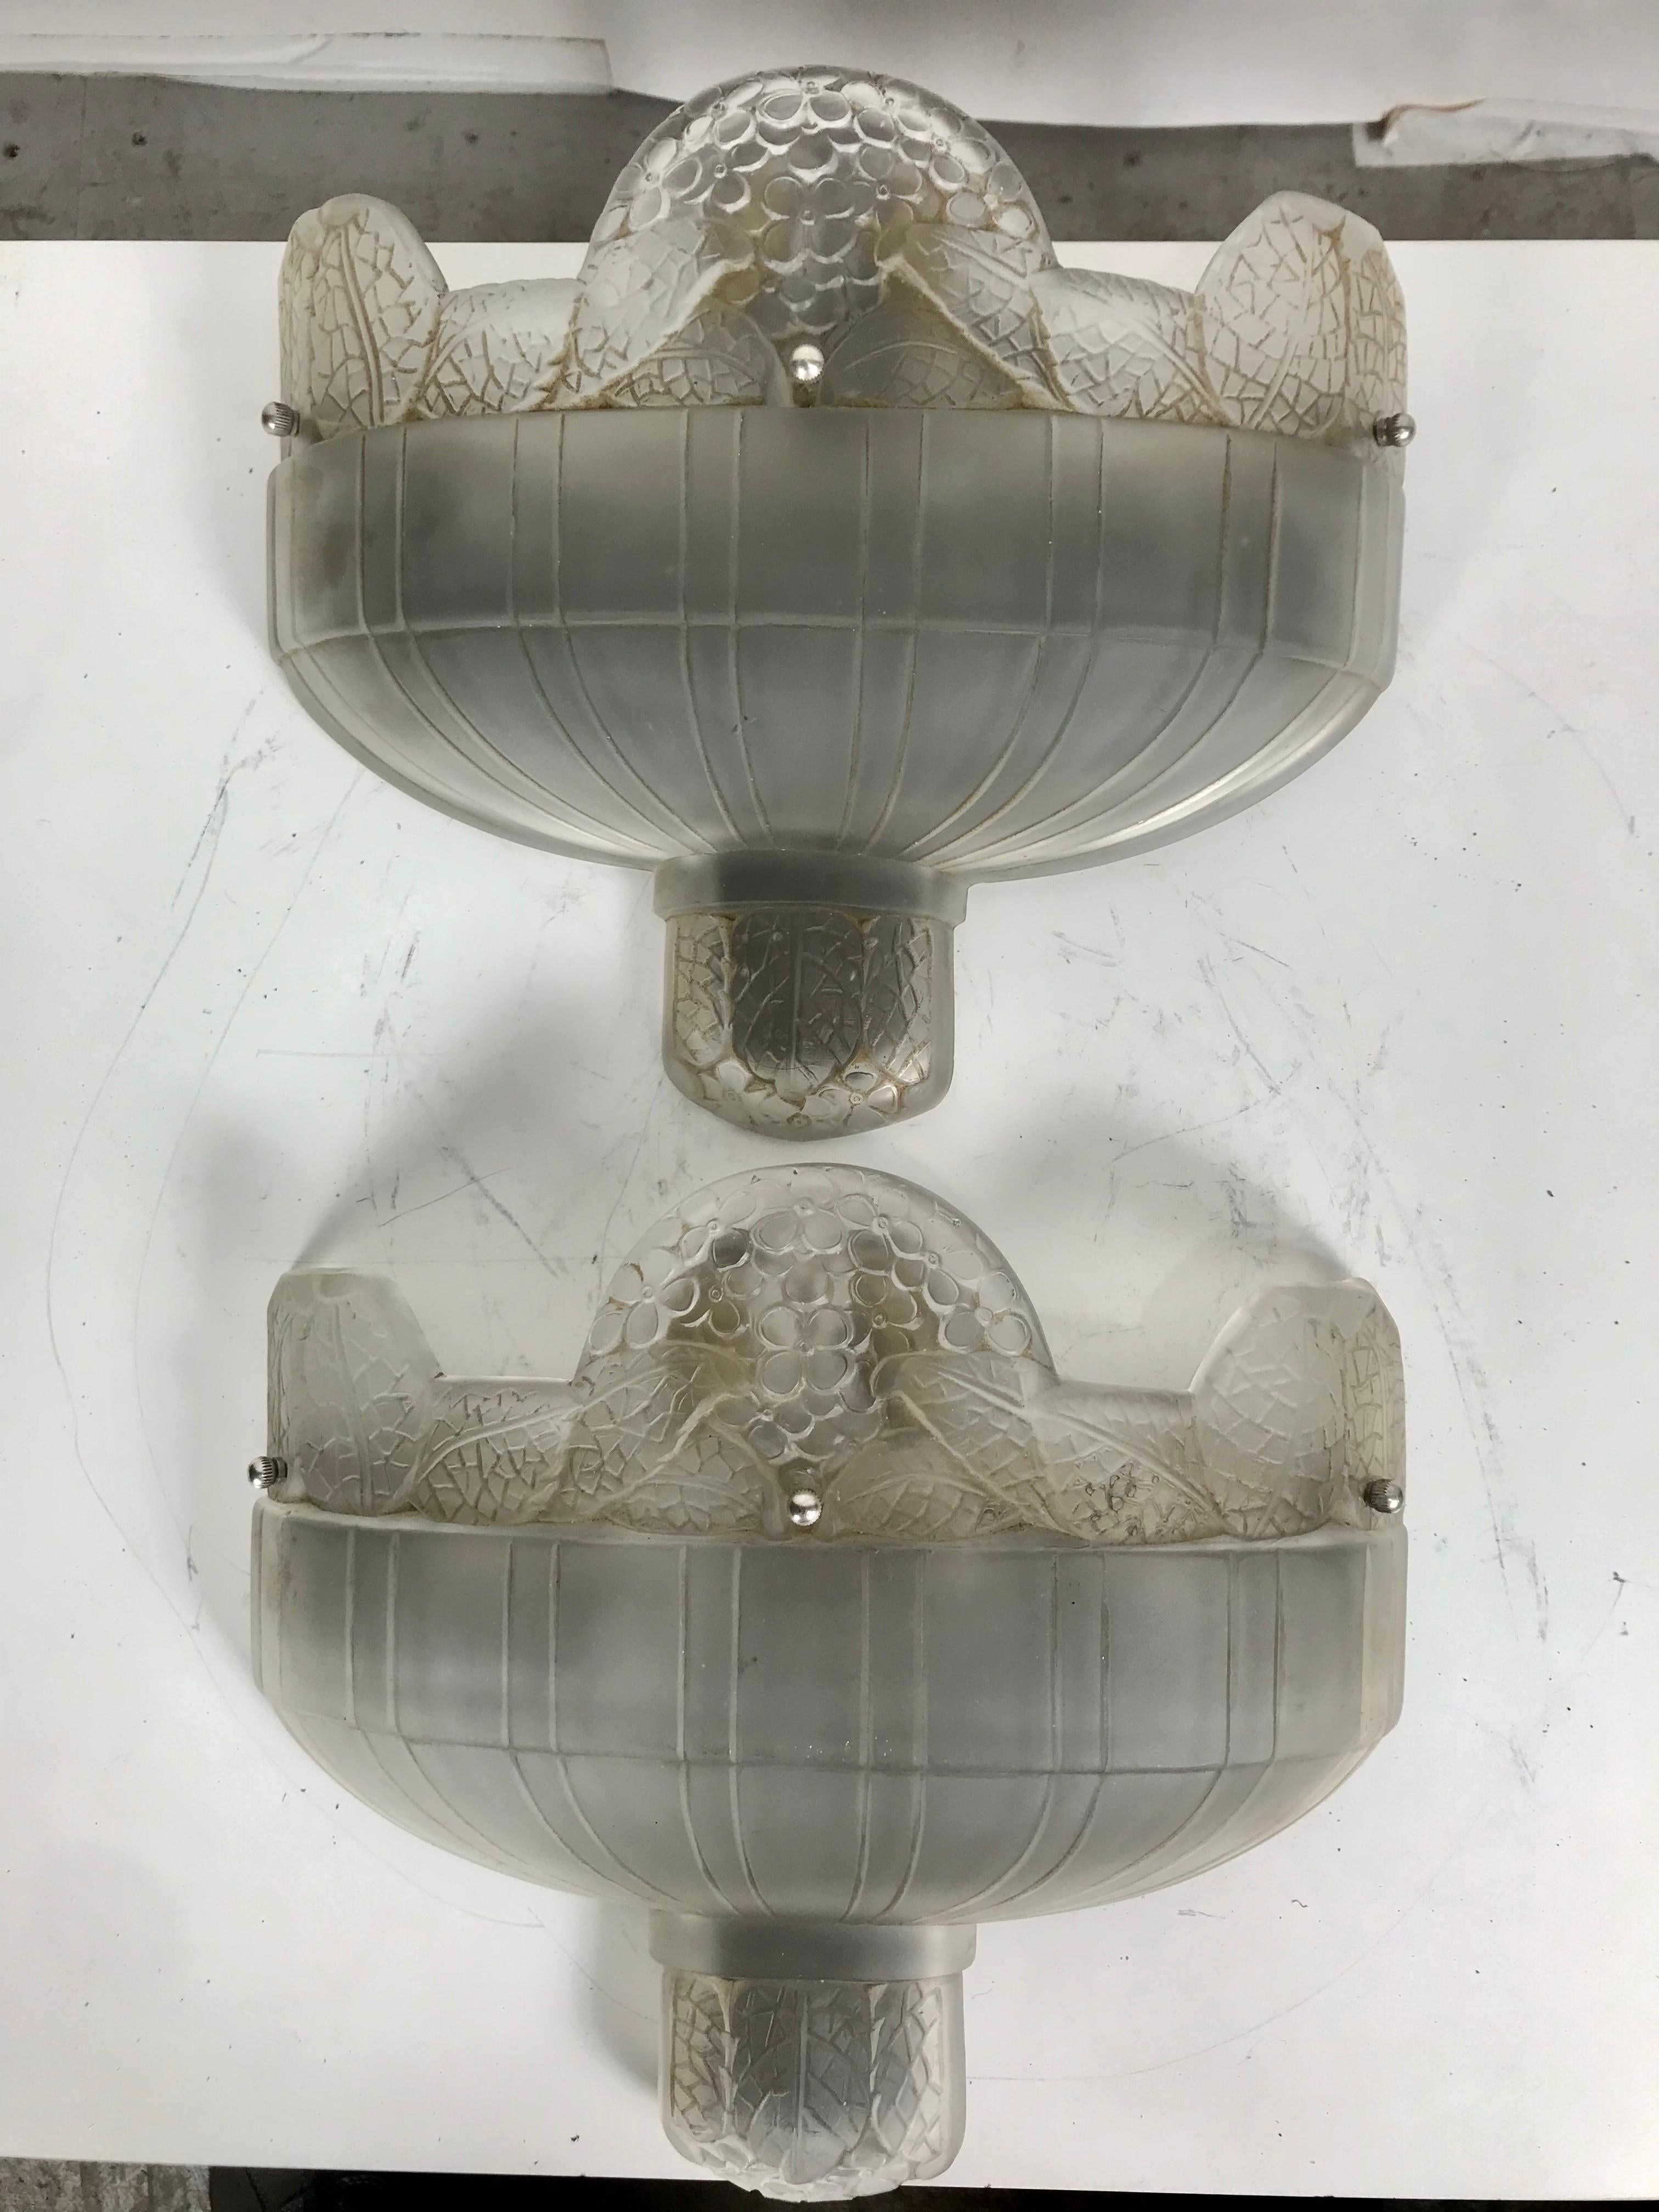 Classic pair of French Art Deco wall sconces in the style of Lalique. Frosted molded glass with floral motif. Deco details with floral design....Nickel frame impressed made in France. Retains original electrical interior fixtures. Tested and